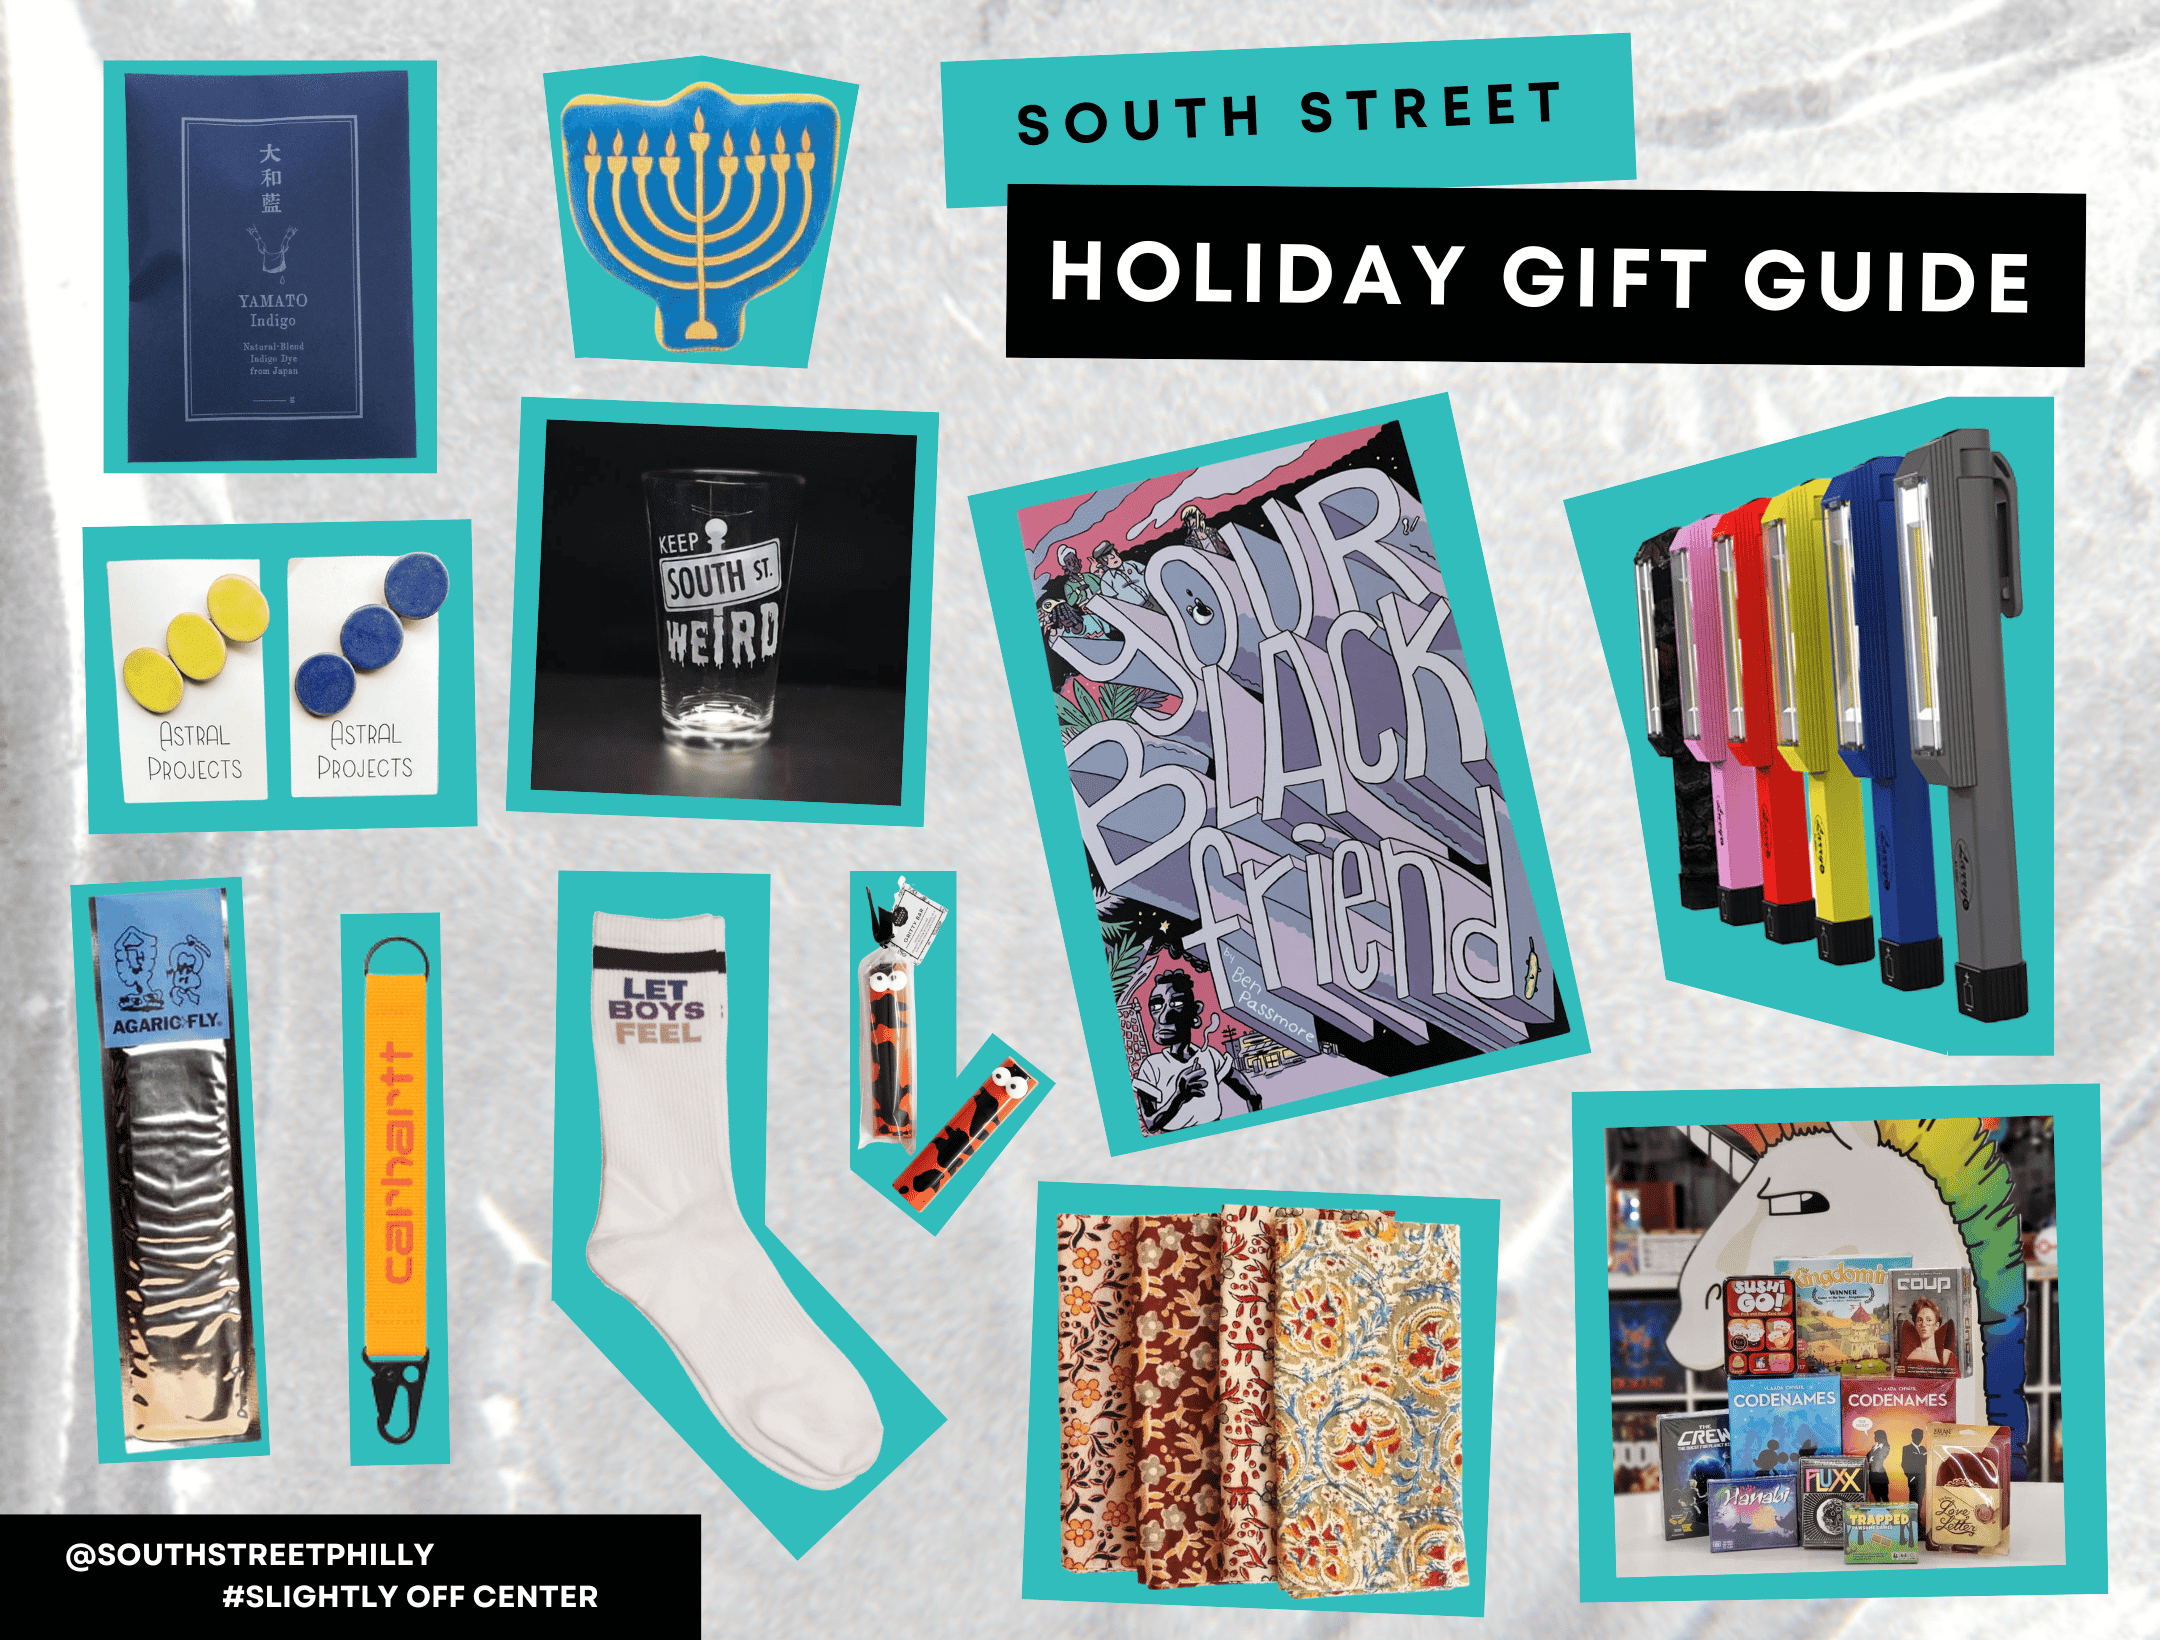 https://southstreet.com/wp-content/uploads/2022/12/South-Street-Gift-Guide-Wide.png